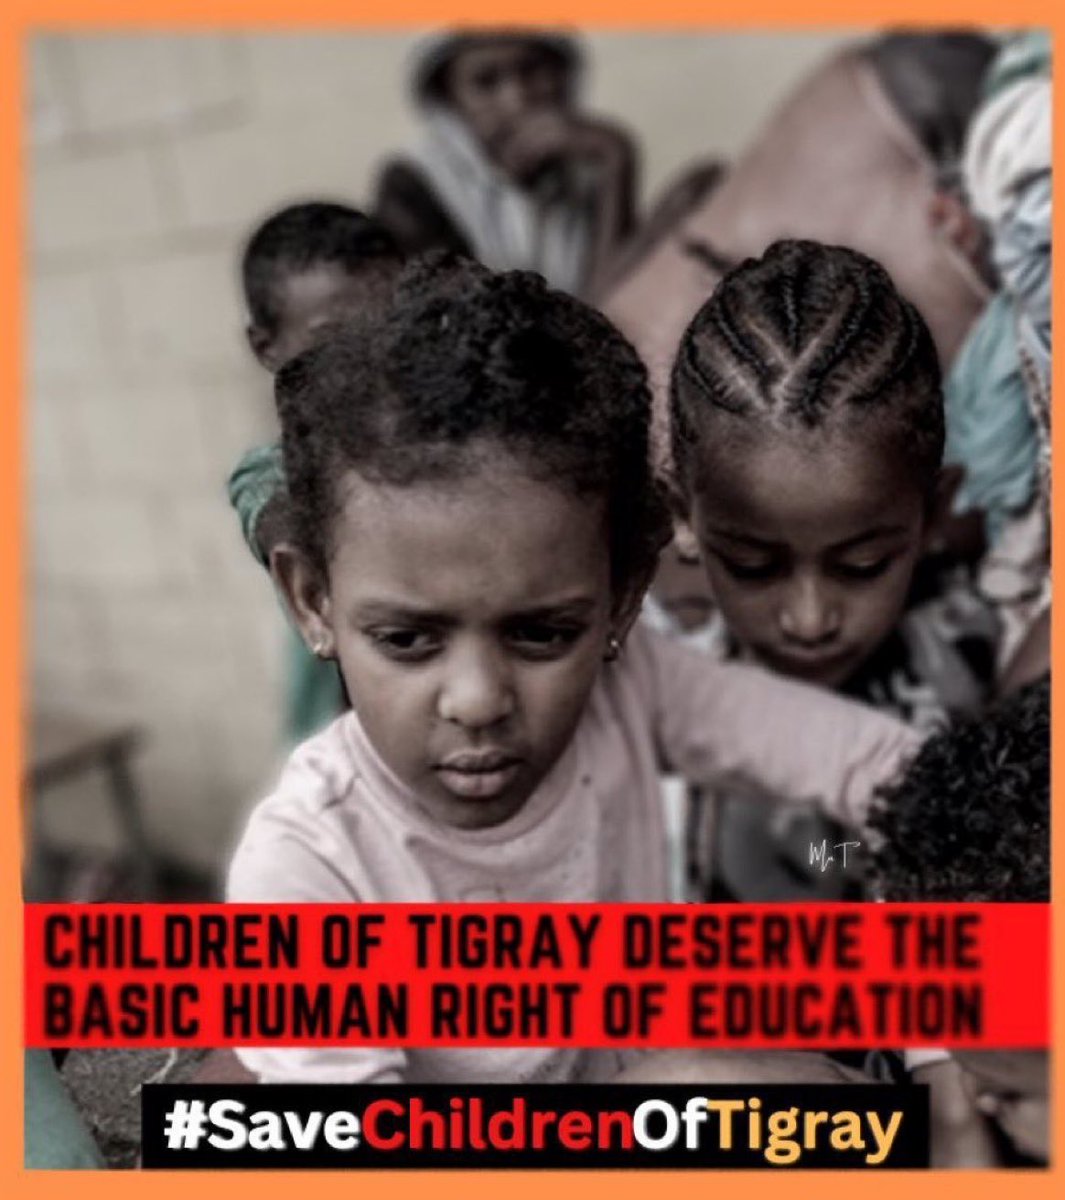 Being human is given, but keeping humanity is our choice
@PowerUSAID @WFPChief 
So Let’s choose to Humanity
Let’s choose to Act now
Let’s choose to fight now
#StandWithTigray #EndTigraySiege 
@OWNTV @BeyGood @ClaraLionelFdn 
And let’s sure for a better world,than it was yesterday